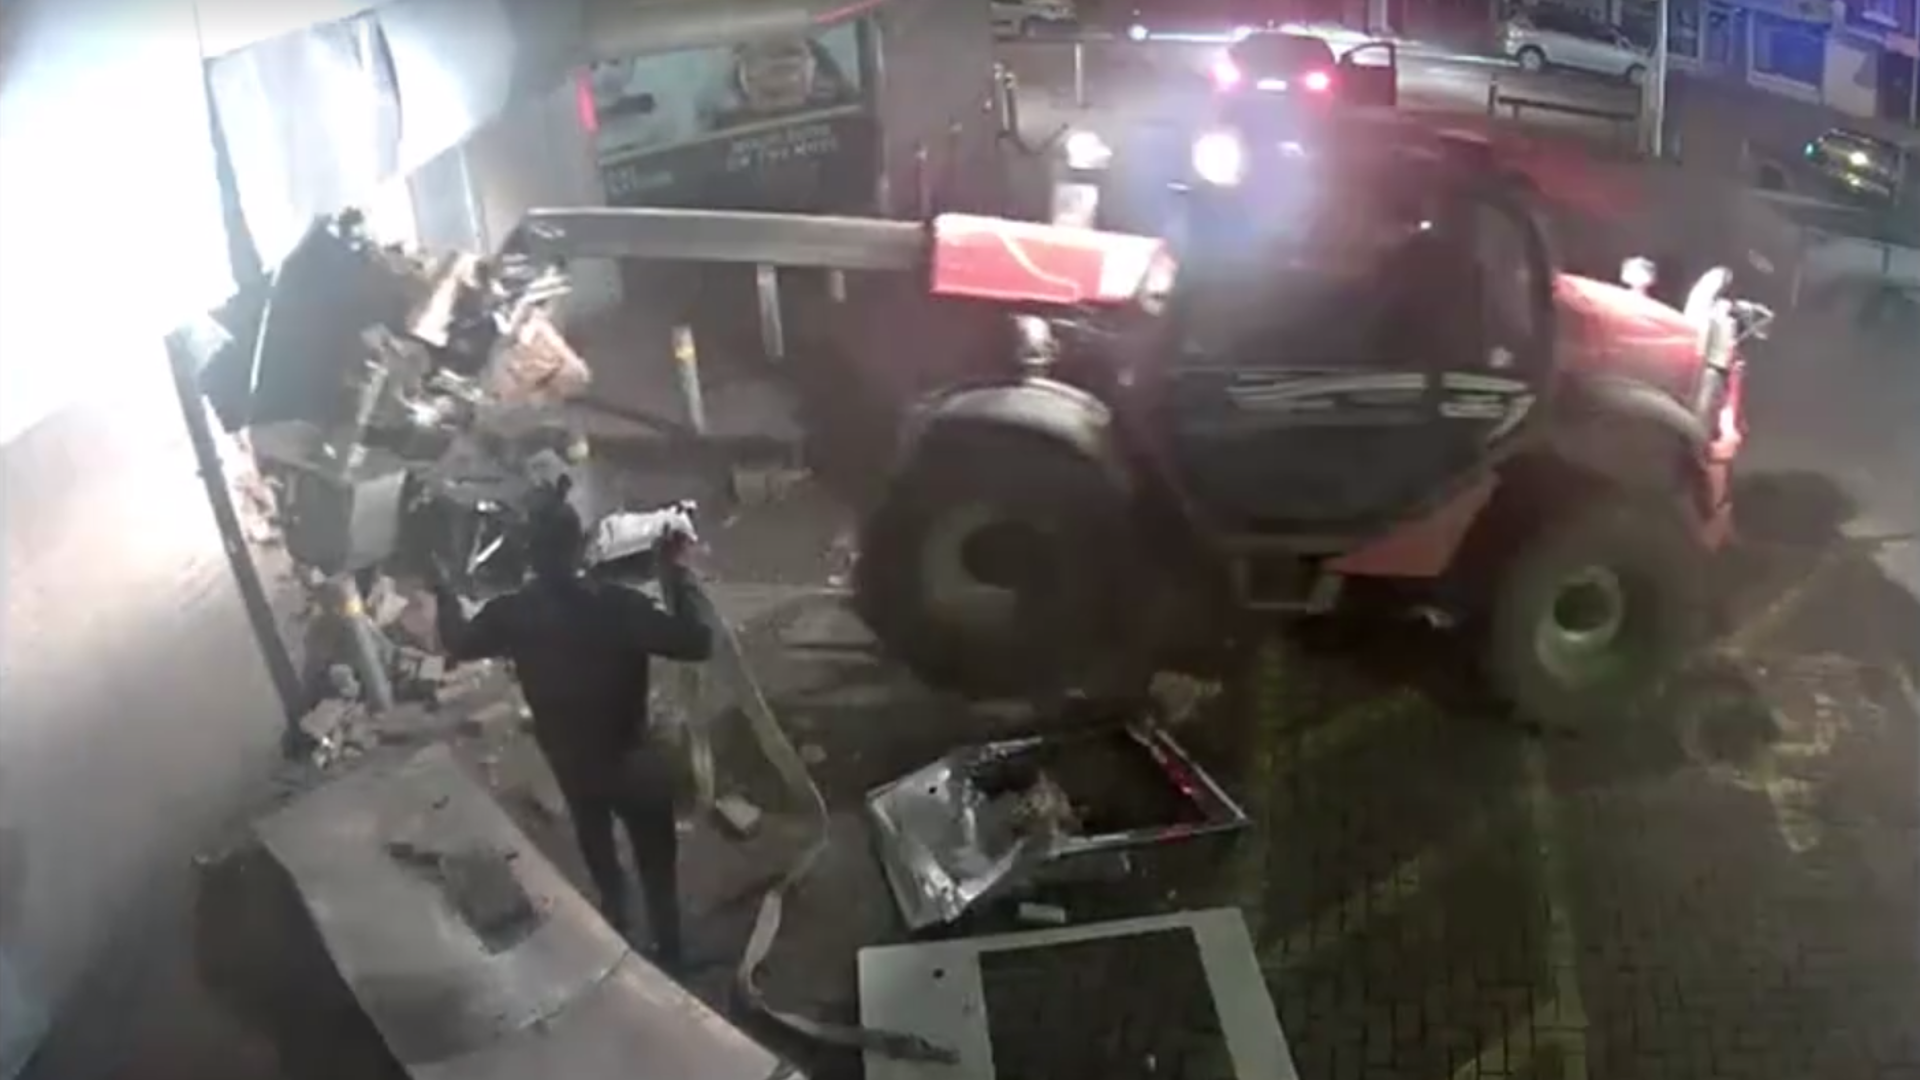 Watch These Subtle Thieves Use a Telehandler as a Battering Ram to Steal an Entire ATM